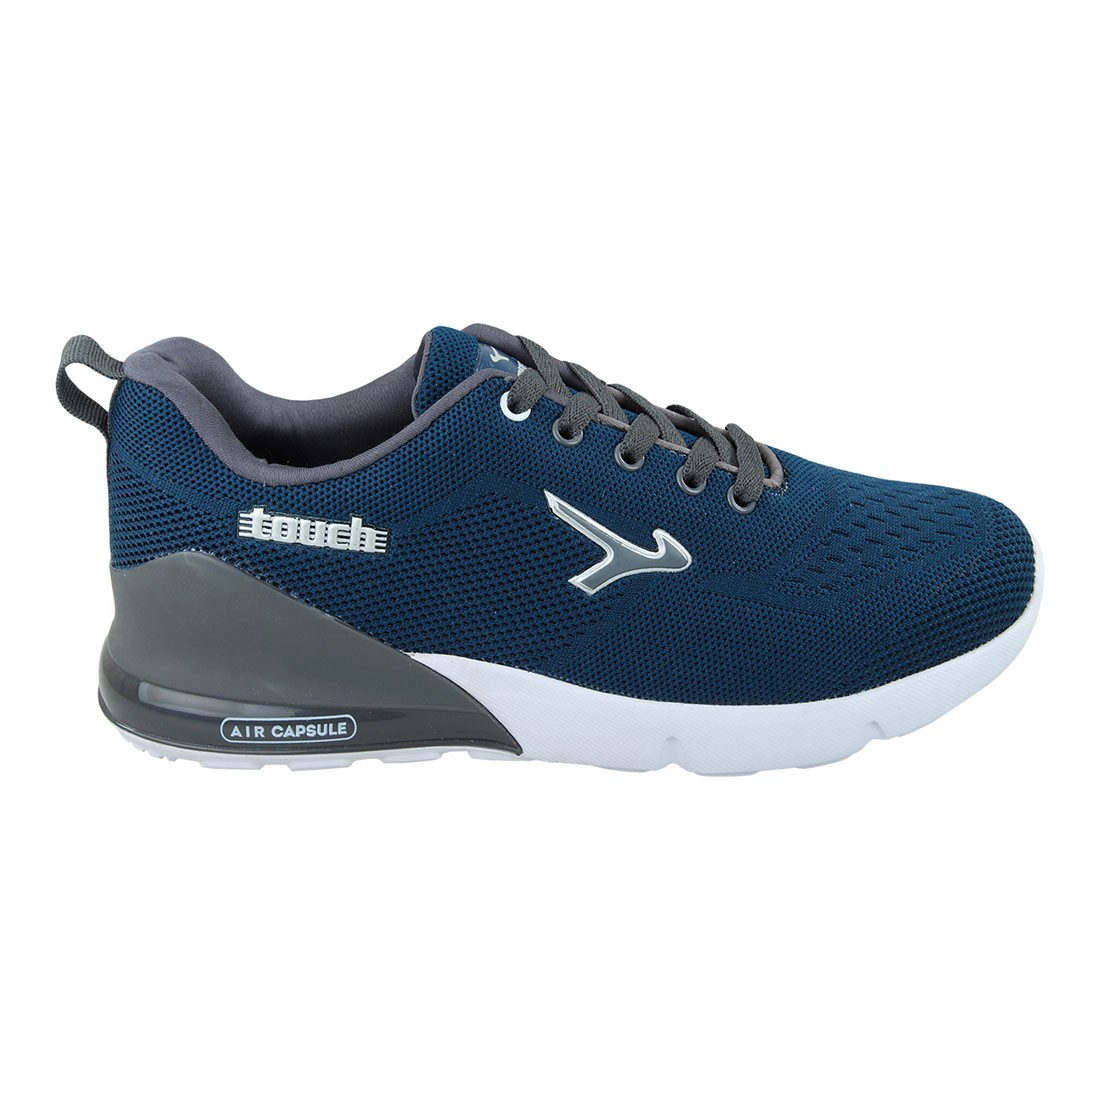 Touch - 9001 - T Blue/Grey